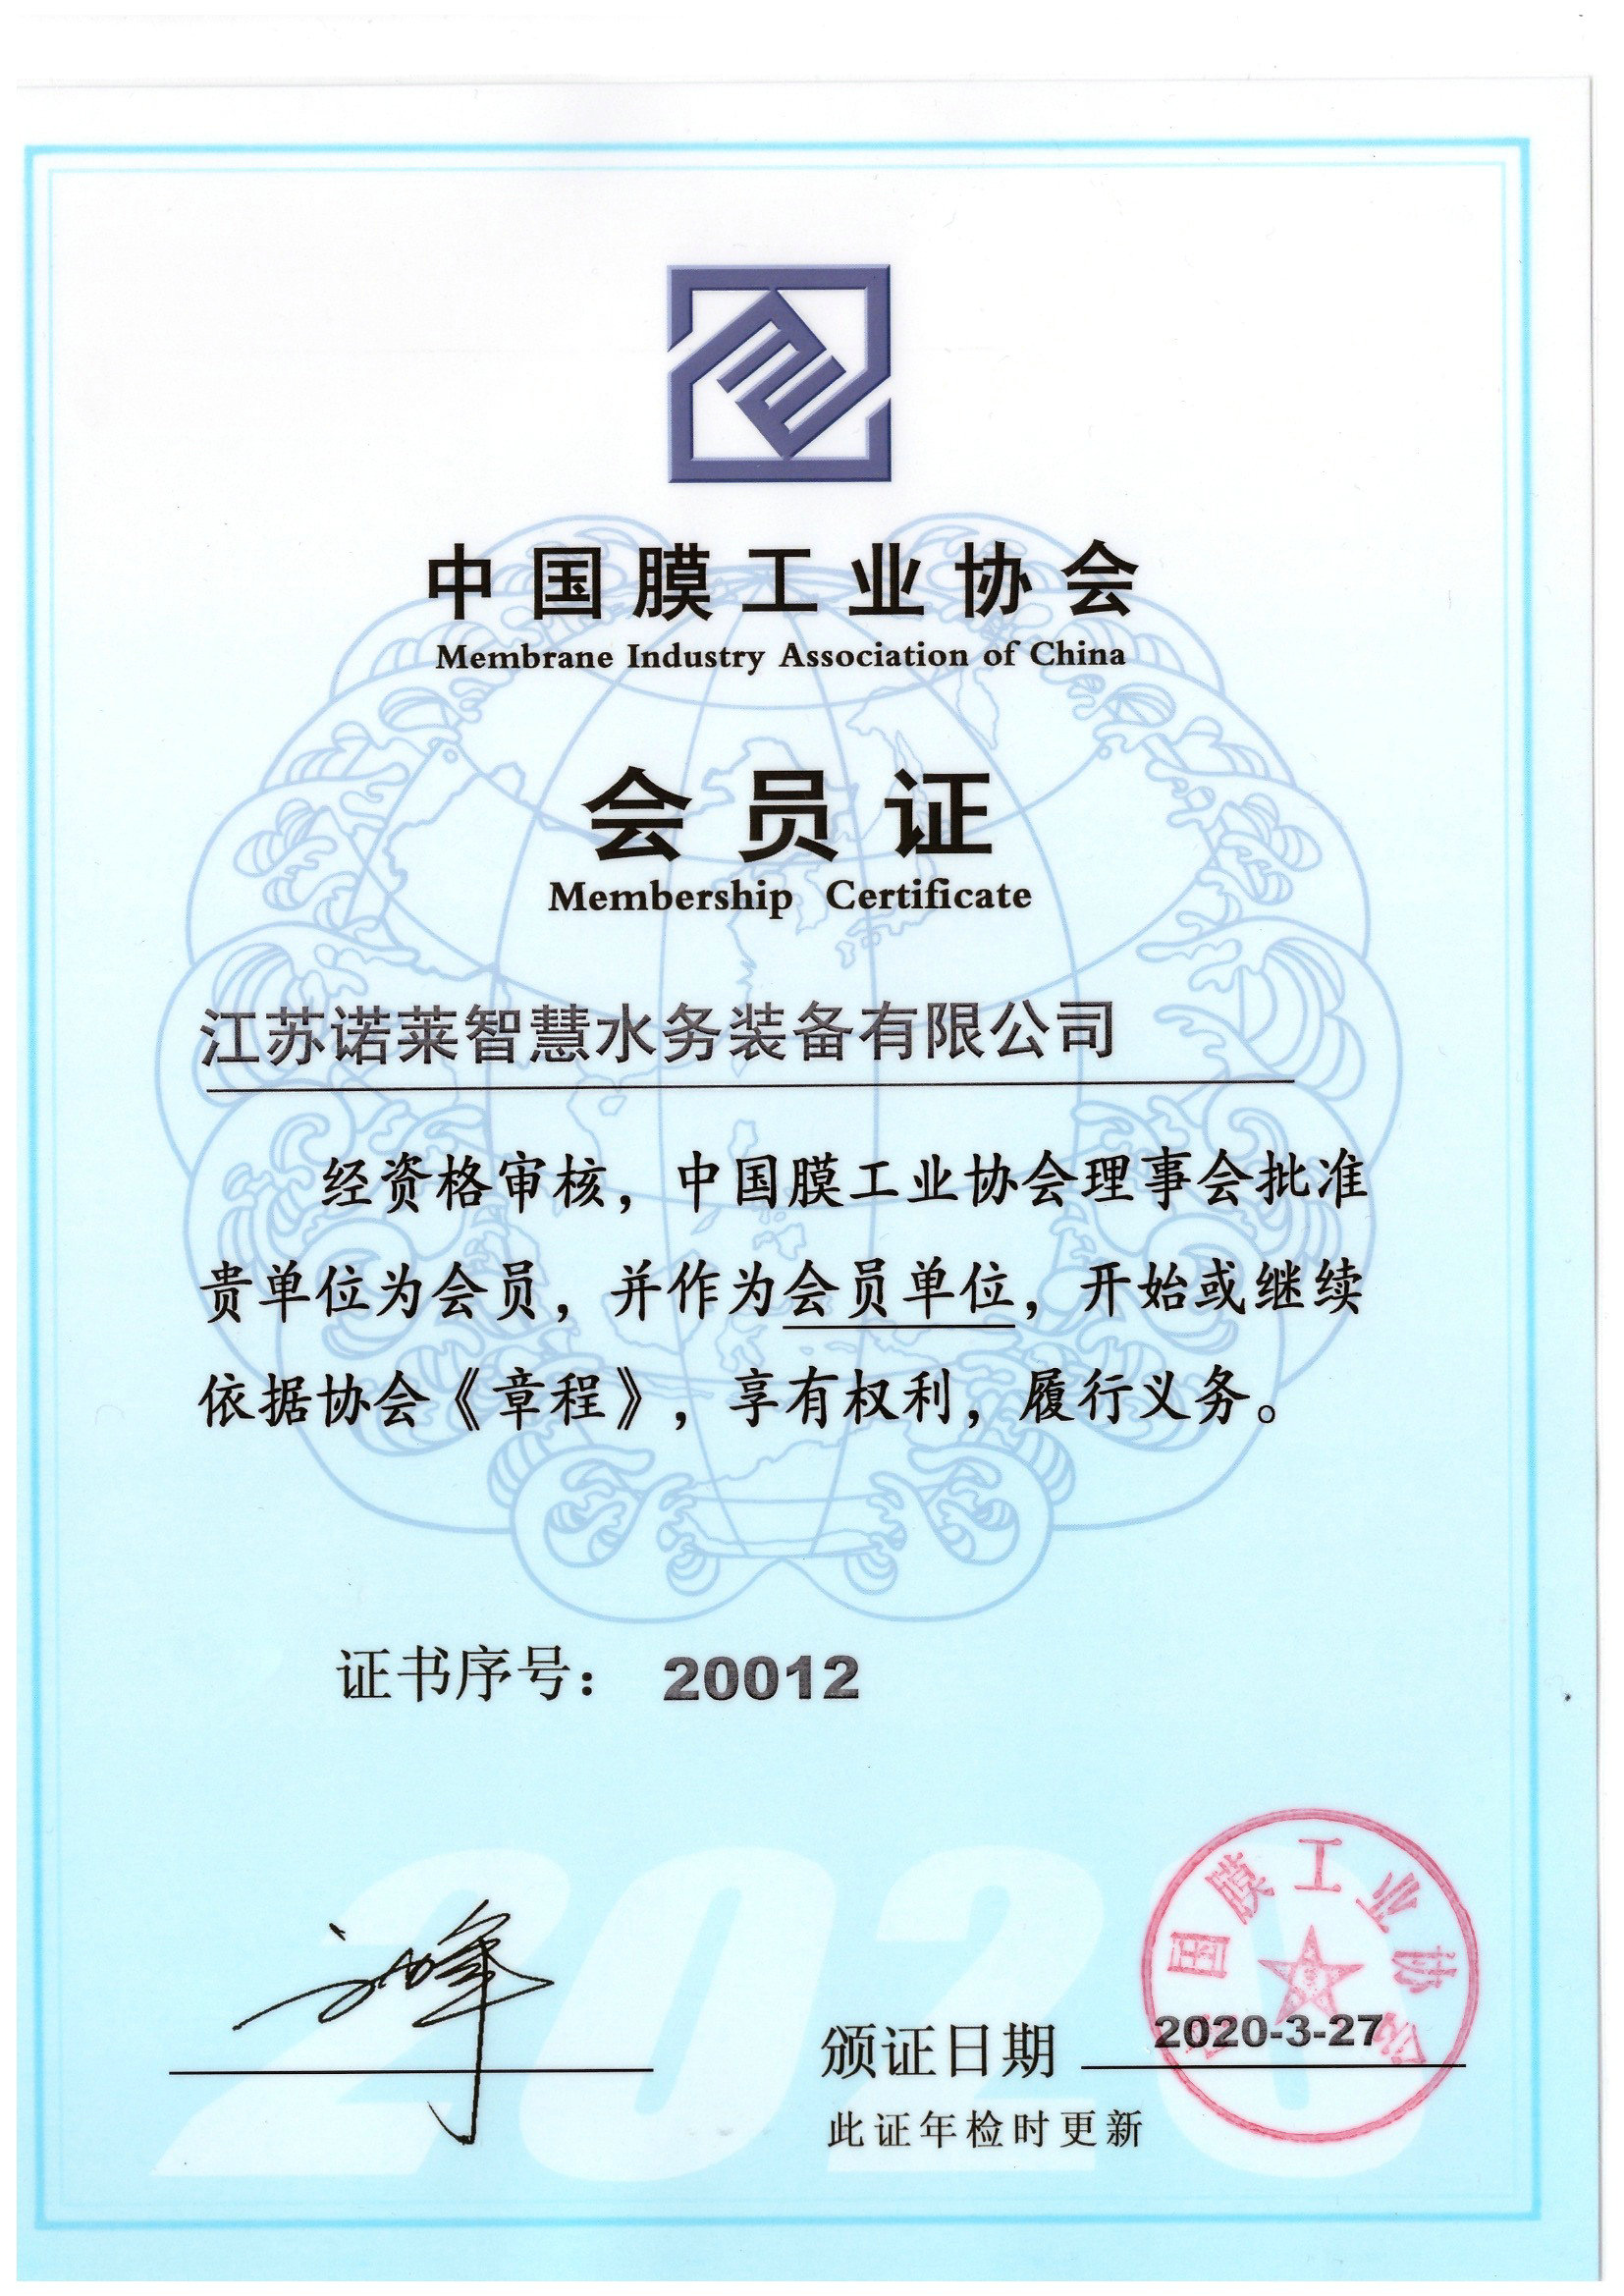 China Membrane Industry Association